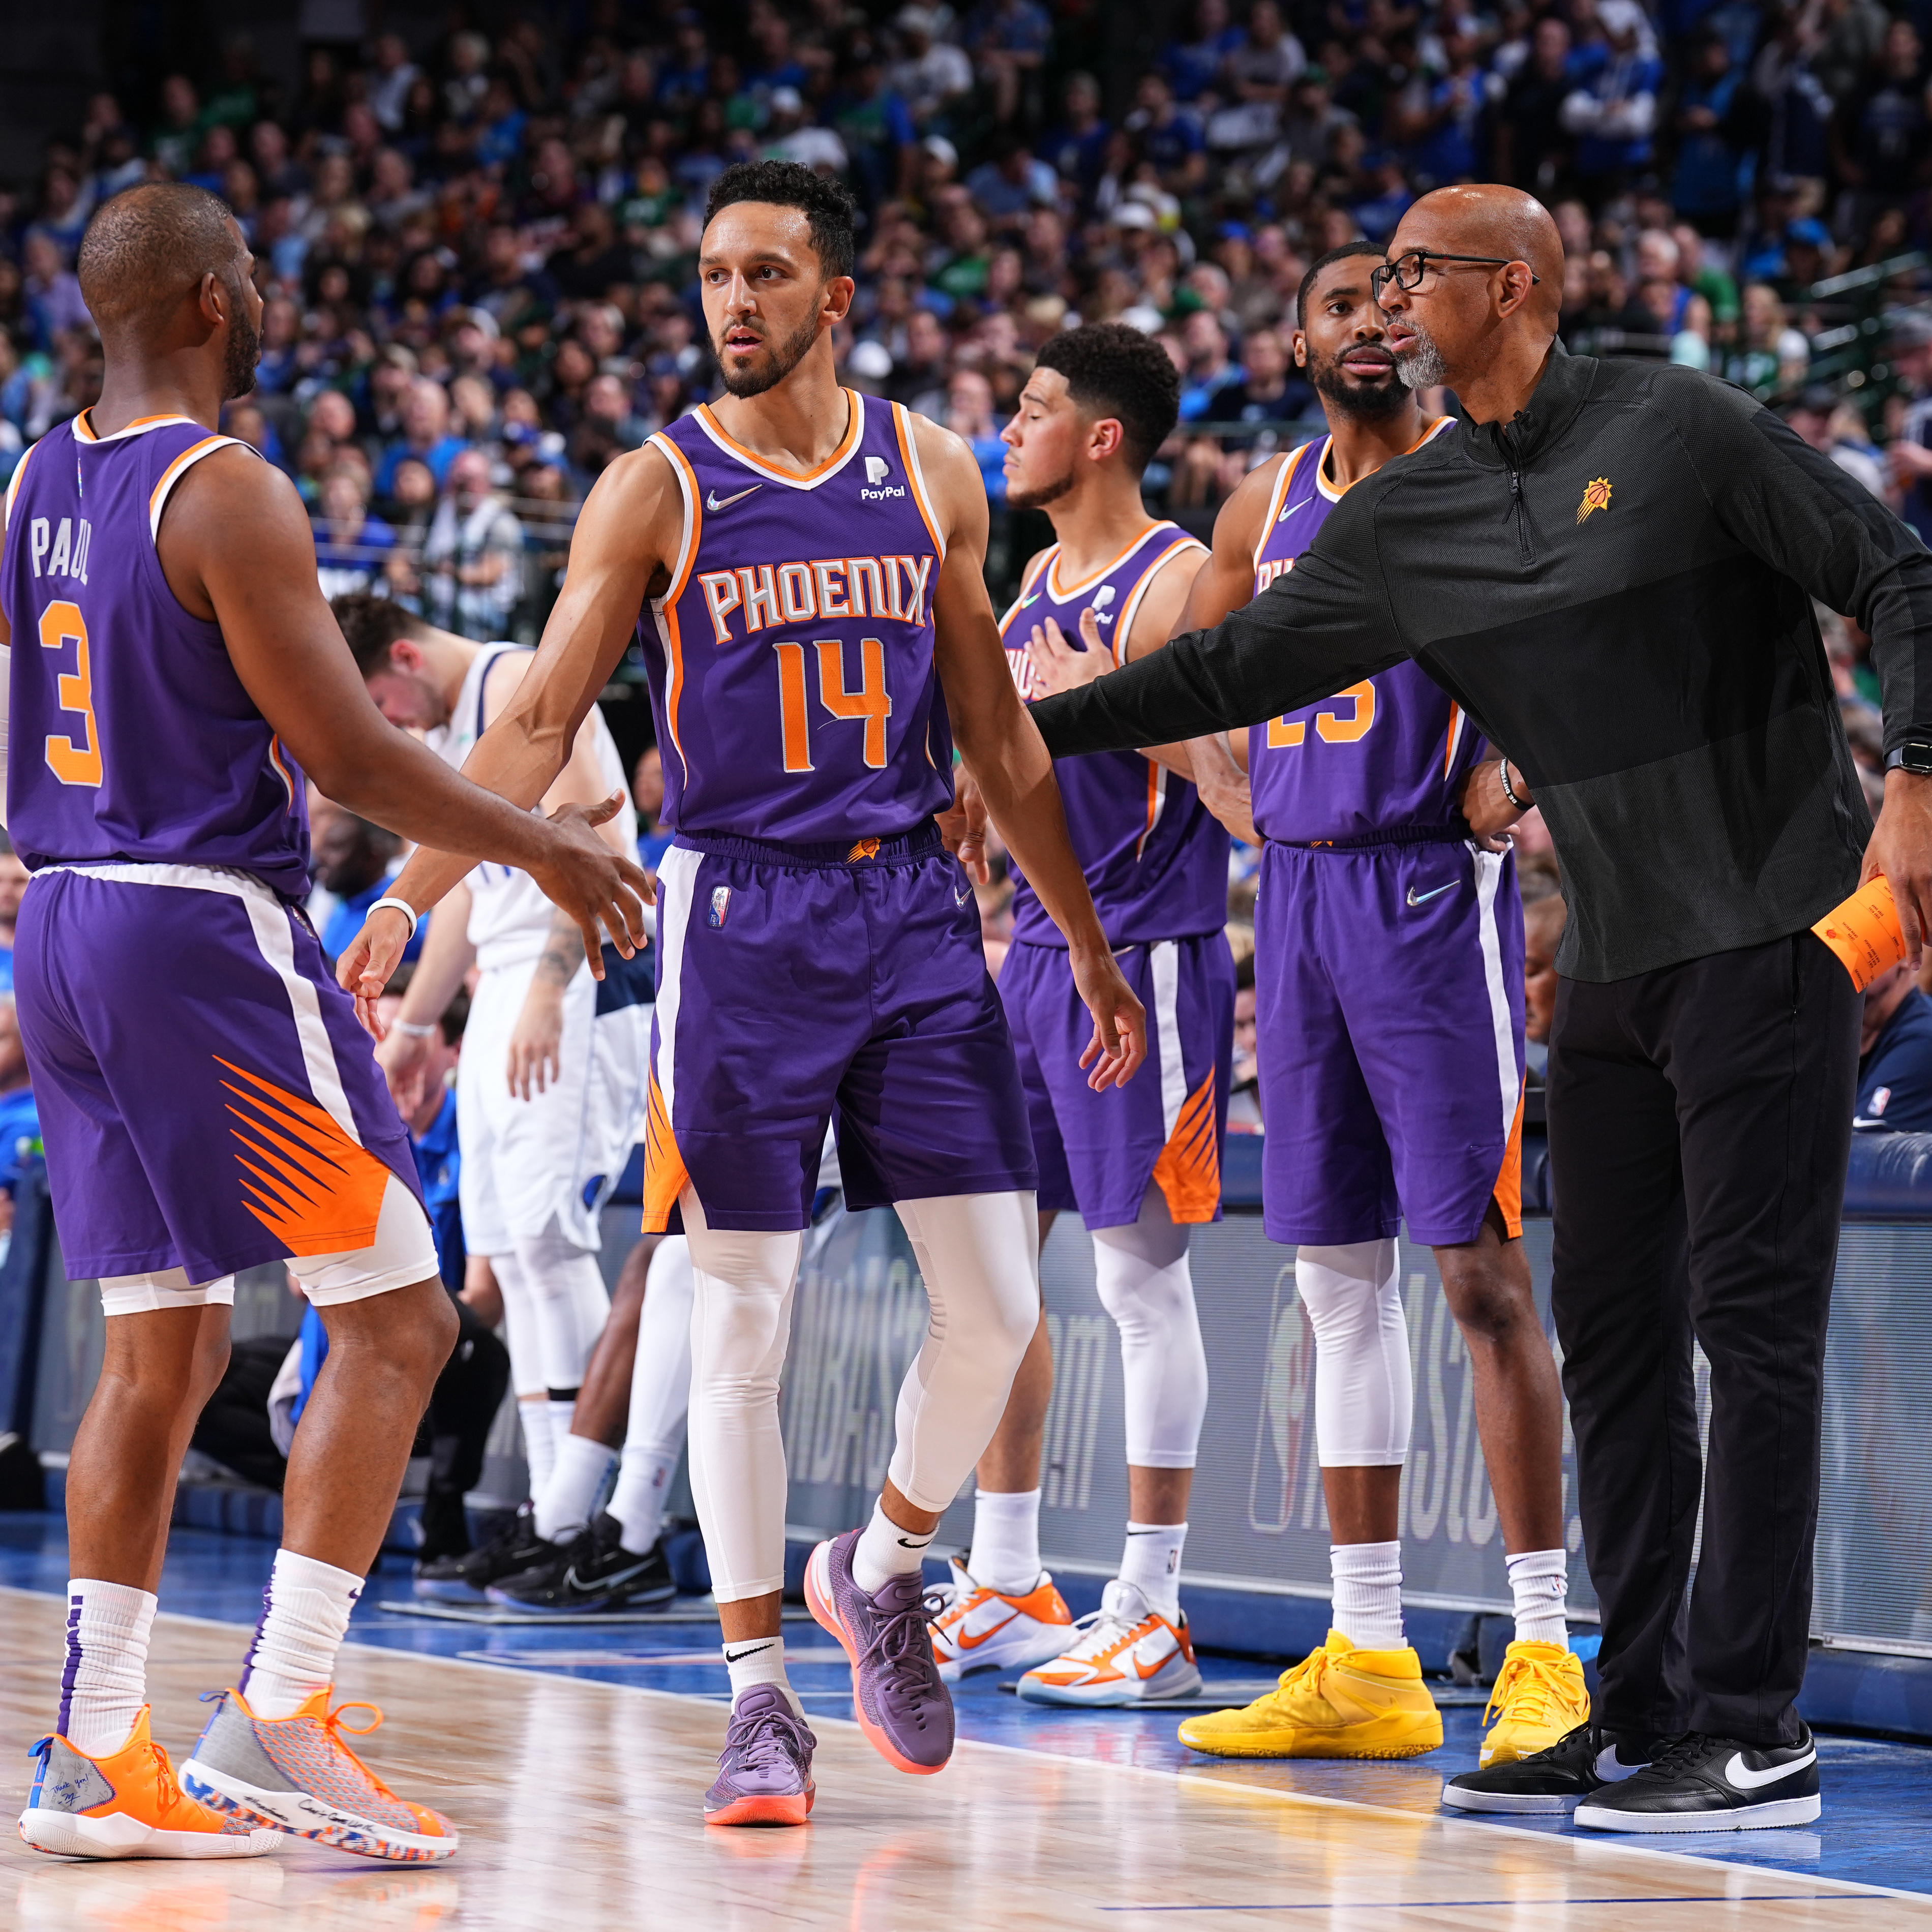 Monty Williams Praises 'Pretty Thick' Tension at Suns Practice After Game 3 Loss